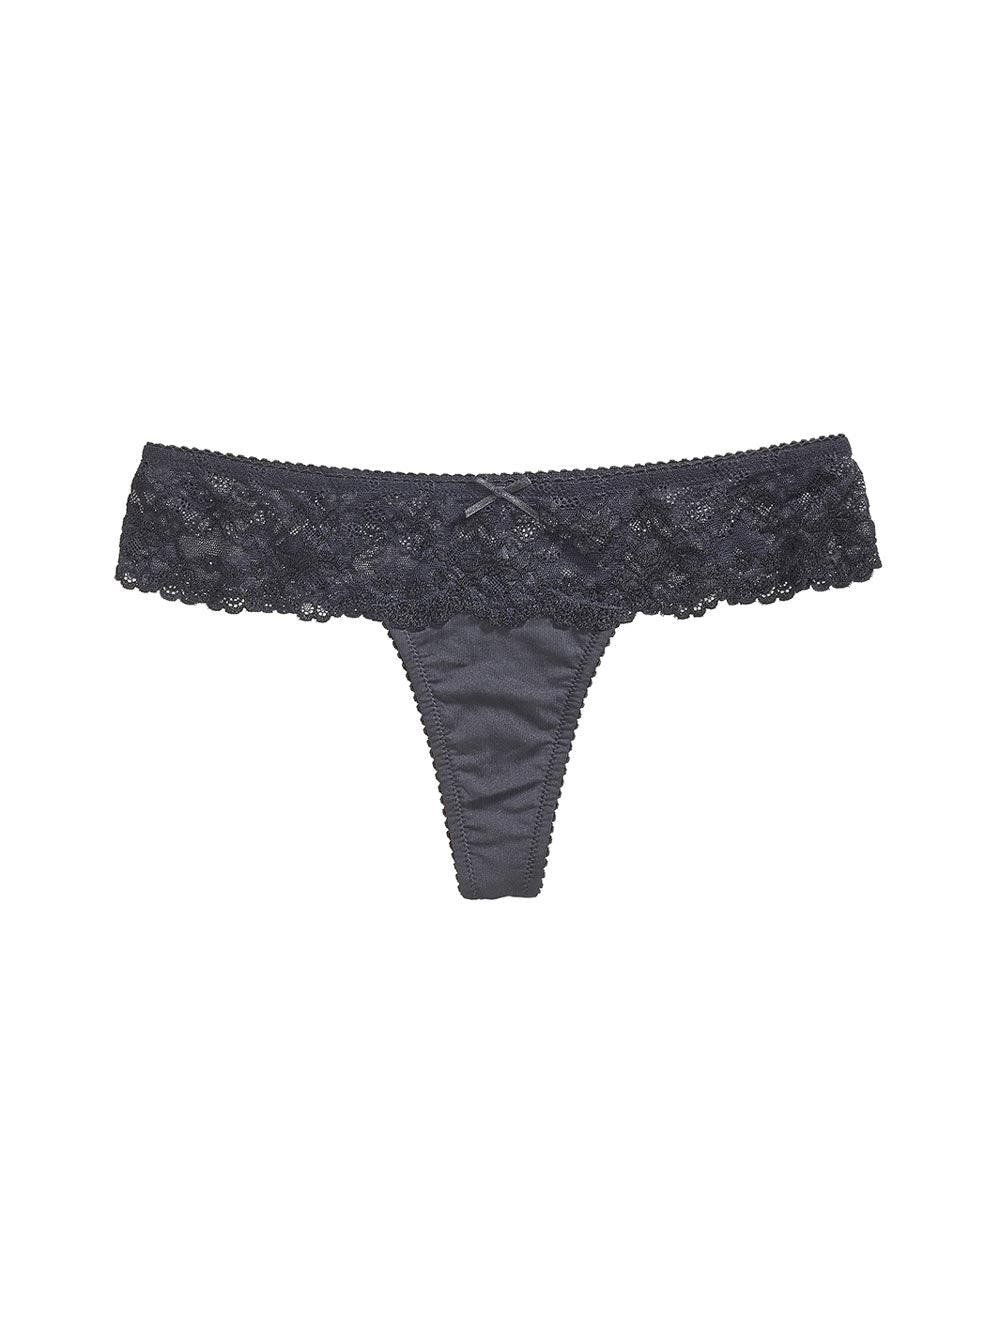 Yvonne Low Rise Lace Detailing Black Thong